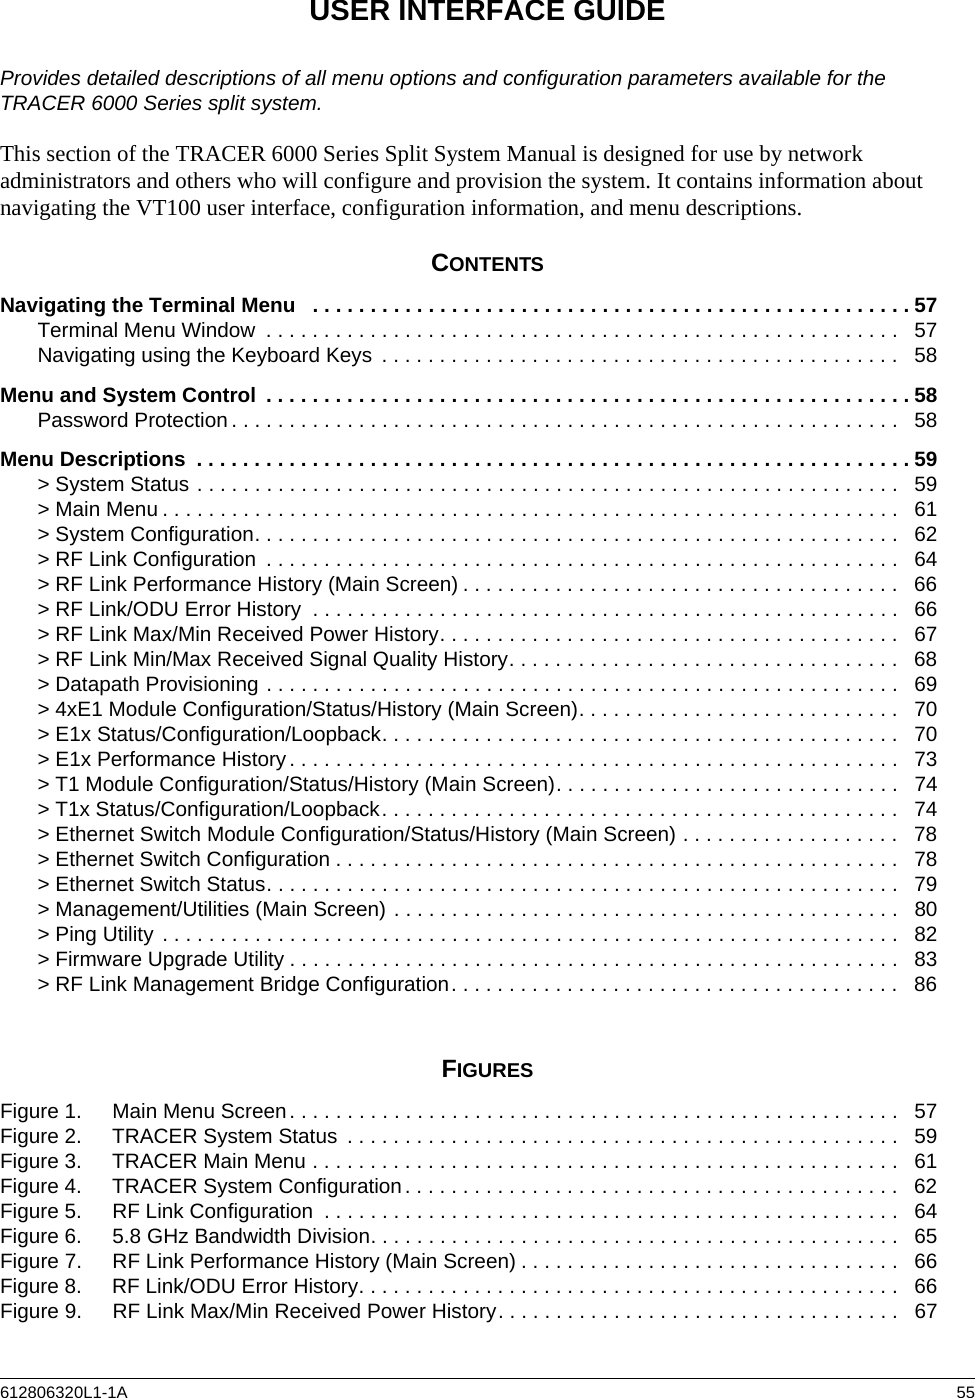 612806320L1-1A  55USER INTERFACE GUIDEProvides detailed descriptions of all menu options and configuration parameters available for the TRACER 6000 Series split system.This section of the TRACER 6000 Series Split System Manual is designed for use by network administrators and others who will configure and provision the system. It contains information about navigating the VT100 user interface, configuration information, and menu descriptions.CONTENTSNavigating the Terminal Menu   . . . . . . . . . . . . . . . . . . . . . . . . . . . . . . . . . . . . . . . . . . . . . . . . . . . . 57Terminal Menu Window  . . . . . . . . . . . . . . . . . . . . . . . . . . . . . . . . . . . . . . . . . . . . . . . . . . . . . . .   57Navigating using the Keyboard Keys  . . . . . . . . . . . . . . . . . . . . . . . . . . . . . . . . . . . . . . . . . . . . .   58Menu and System Control  . . . . . . . . . . . . . . . . . . . . . . . . . . . . . . . . . . . . . . . . . . . . . . . . . . . . . . . . 58Password Protection . . . . . . . . . . . . . . . . . . . . . . . . . . . . . . . . . . . . . . . . . . . . . . . . . . . . . . . . . .   58Menu Descriptions  . . . . . . . . . . . . . . . . . . . . . . . . . . . . . . . . . . . . . . . . . . . . . . . . . . . . . . . . . . . . . . 59&gt; System Status . . . . . . . . . . . . . . . . . . . . . . . . . . . . . . . . . . . . . . . . . . . . . . . . . . . . . . . . . . . . .   59&gt; Main Menu . . . . . . . . . . . . . . . . . . . . . . . . . . . . . . . . . . . . . . . . . . . . . . . . . . . . . . . . . . . . . . . .   61&gt; System Configuration. . . . . . . . . . . . . . . . . . . . . . . . . . . . . . . . . . . . . . . . . . . . . . . . . . . . . . . .   62&gt; RF Link Configuration  . . . . . . . . . . . . . . . . . . . . . . . . . . . . . . . . . . . . . . . . . . . . . . . . . . . . . . .   64&gt; RF Link Performance History (Main Screen) . . . . . . . . . . . . . . . . . . . . . . . . . . . . . . . . . . . . . .   66&gt; RF Link/ODU Error History  . . . . . . . . . . . . . . . . . . . . . . . . . . . . . . . . . . . . . . . . . . . . . . . . . . .   66&gt; RF Link Max/Min Received Power History. . . . . . . . . . . . . . . . . . . . . . . . . . . . . . . . . . . . . . . .   67&gt; RF Link Min/Max Received Signal Quality History. . . . . . . . . . . . . . . . . . . . . . . . . . . . . . . . . .   68&gt; Datapath Provisioning . . . . . . . . . . . . . . . . . . . . . . . . . . . . . . . . . . . . . . . . . . . . . . . . . . . . . . .   69&gt; 4xE1 Module Configuration/Status/History (Main Screen). . . . . . . . . . . . . . . . . . . . . . . . . . . .   70&gt; E1x Status/Configuration/Loopback. . . . . . . . . . . . . . . . . . . . . . . . . . . . . . . . . . . . . . . . . . . . .   70&gt; E1x Performance History . . . . . . . . . . . . . . . . . . . . . . . . . . . . . . . . . . . . . . . . . . . . . . . . . . . . .   73&gt; T1 Module Configuration/Status/History (Main Screen). . . . . . . . . . . . . . . . . . . . . . . . . . . . . .   74&gt; T1x Status/Configuration/Loopback. . . . . . . . . . . . . . . . . . . . . . . . . . . . . . . . . . . . . . . . . . . . .   74&gt; Ethernet Switch Module Configuration/Status/History (Main Screen) . . . . . . . . . . . . . . . . . . .   78&gt; Ethernet Switch Configuration . . . . . . . . . . . . . . . . . . . . . . . . . . . . . . . . . . . . . . . . . . . . . . . . .  78&gt; Ethernet Switch Status. . . . . . . . . . . . . . . . . . . . . . . . . . . . . . . . . . . . . . . . . . . . . . . . . . . . . . .   79&gt; Management/Utilities (Main Screen) . . . . . . . . . . . . . . . . . . . . . . . . . . . . . . . . . . . . . . . . . . . .   80&gt; Ping Utility . . . . . . . . . . . . . . . . . . . . . . . . . . . . . . . . . . . . . . . . . . . . . . . . . . . . . . . . . . . . . . . .   82&gt; Firmware Upgrade Utility . . . . . . . . . . . . . . . . . . . . . . . . . . . . . . . . . . . . . . . . . . . . . . . . . . . . .   83&gt; RF Link Management Bridge Configuration. . . . . . . . . . . . . . . . . . . . . . . . . . . . . . . . . . . . . . .   86FIGURESFigure 1. Main Menu Screen. . . . . . . . . . . . . . . . . . . . . . . . . . . . . . . . . . . . . . . . . . . . . . . . . . . . .   57Figure 2. TRACER System Status  . . . . . . . . . . . . . . . . . . . . . . . . . . . . . . . . . . . . . . . . . . . . . . . .   59Figure 3. TRACER Main Menu . . . . . . . . . . . . . . . . . . . . . . . . . . . . . . . . . . . . . . . . . . . . . . . . . . .  61Figure 4. TRACER System Configuration. . . . . . . . . . . . . . . . . . . . . . . . . . . . . . . . . . . . . . . . . . .   62Figure 5. RF Link Configuration  . . . . . . . . . . . . . . . . . . . . . . . . . . . . . . . . . . . . . . . . . . . . . . . . . .   64Figure 6. 5.8 GHz Bandwidth Division. . . . . . . . . . . . . . . . . . . . . . . . . . . . . . . . . . . . . . . . . . . . . .   65Figure 7. RF Link Performance History (Main Screen) . . . . . . . . . . . . . . . . . . . . . . . . . . . . . . . . .   66Figure 8. RF Link/ODU Error History. . . . . . . . . . . . . . . . . . . . . . . . . . . . . . . . . . . . . . . . . . . . . . .  66Figure 9. RF Link Max/Min Received Power History. . . . . . . . . . . . . . . . . . . . . . . . . . . . . . . . . . .   67